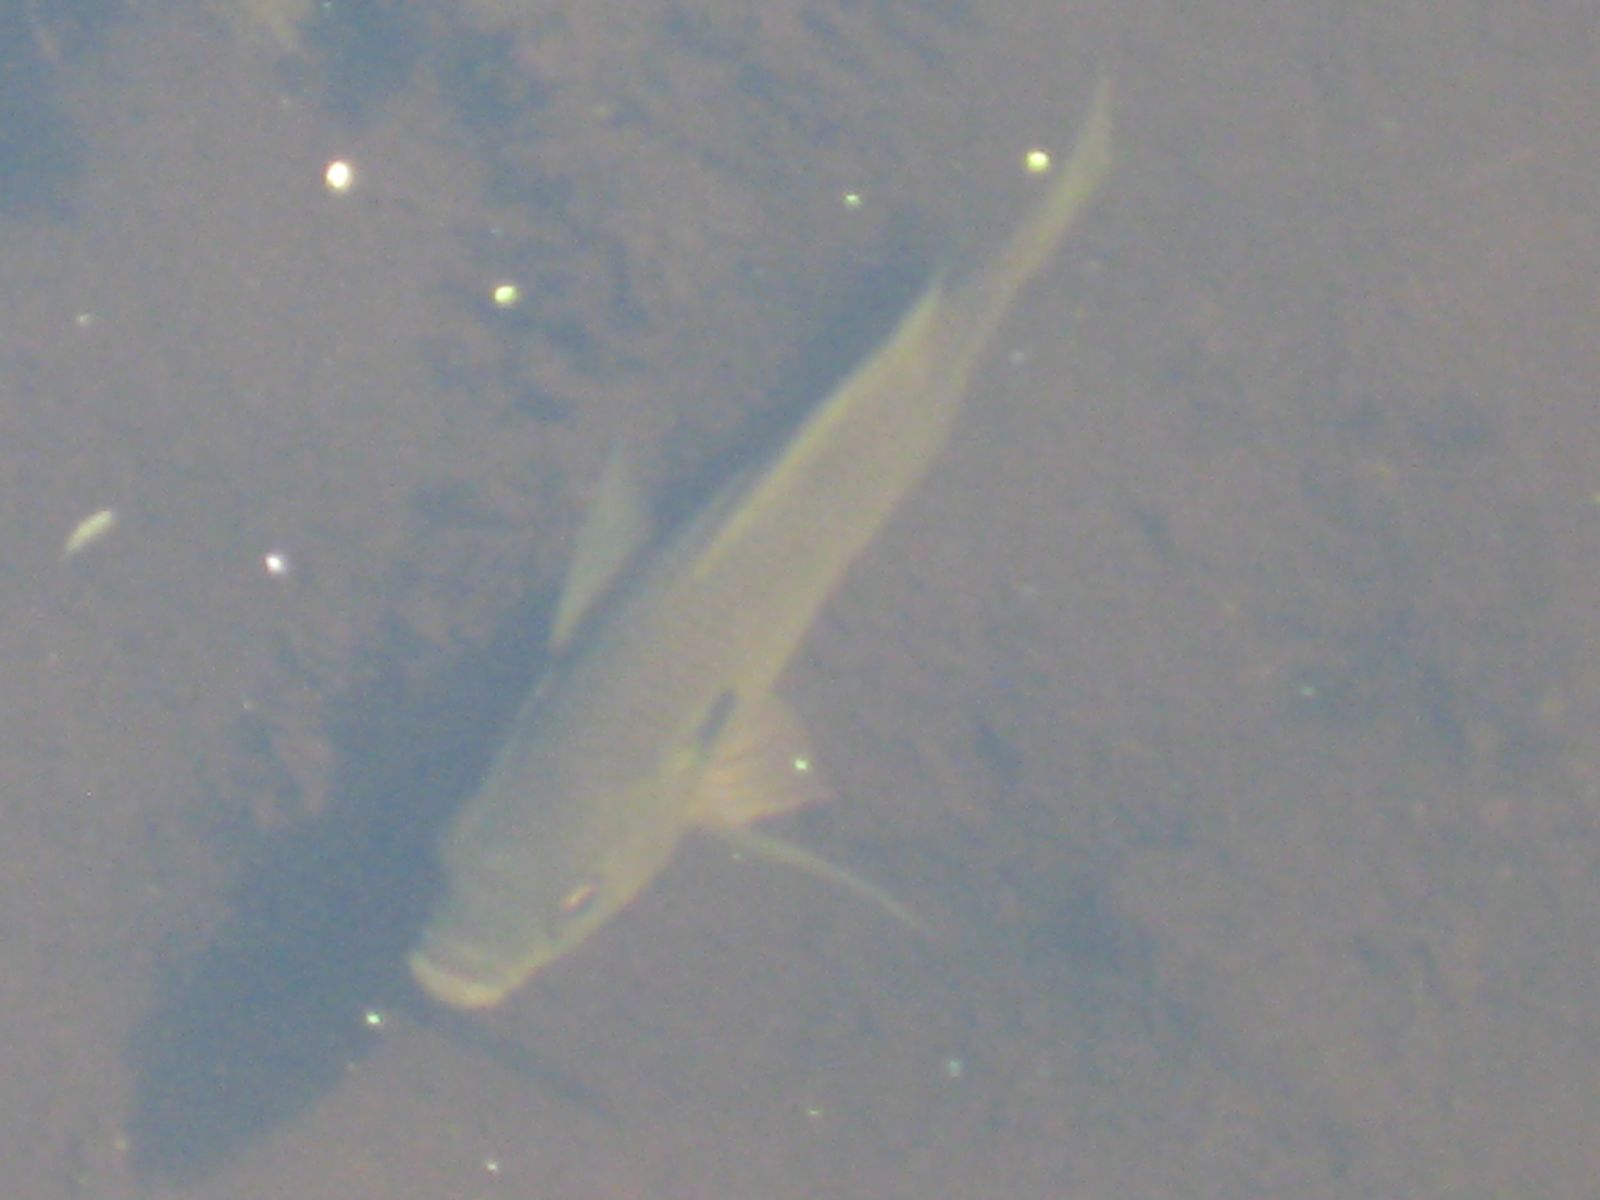 a fish swimming through the water in a pond